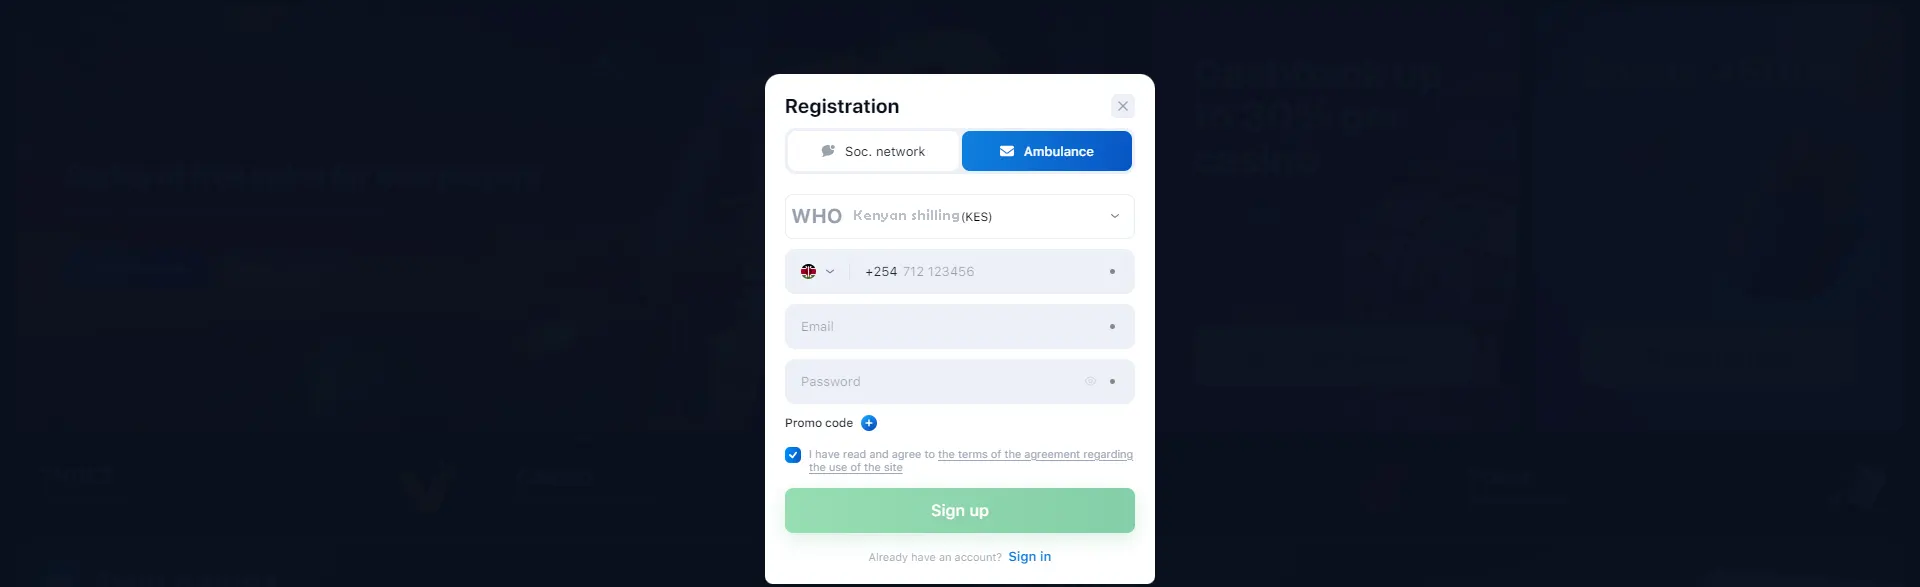 Registration field for new players on the 1win betting site.